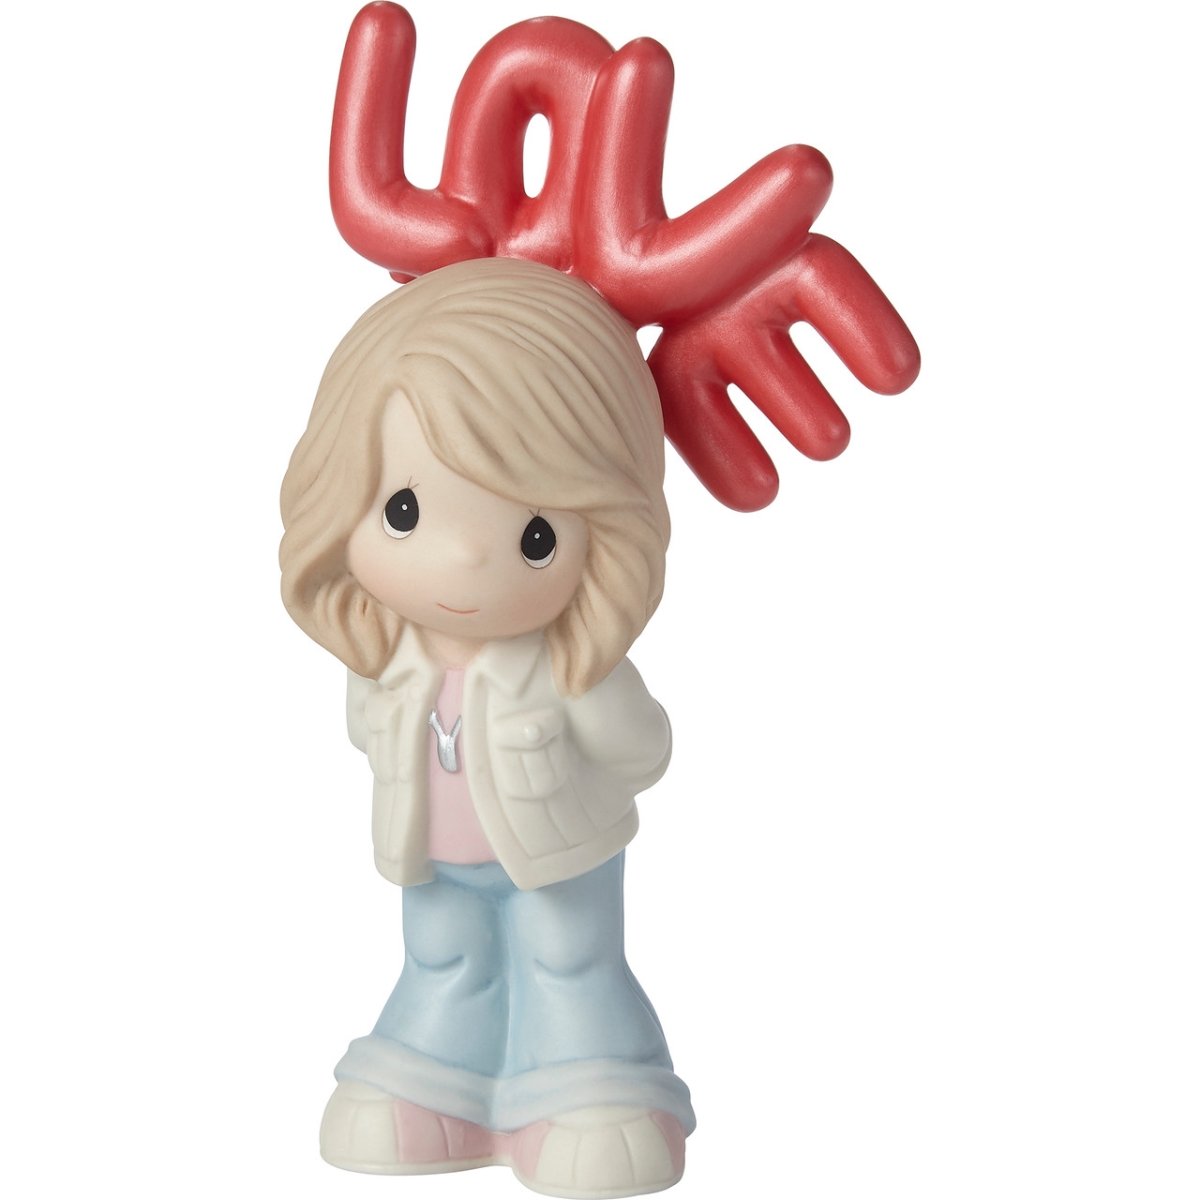 Picture of Be the Light Christian Bookstore 202001 Porcelain Holding Red Love Balloons Girl Figurine, Multi Color